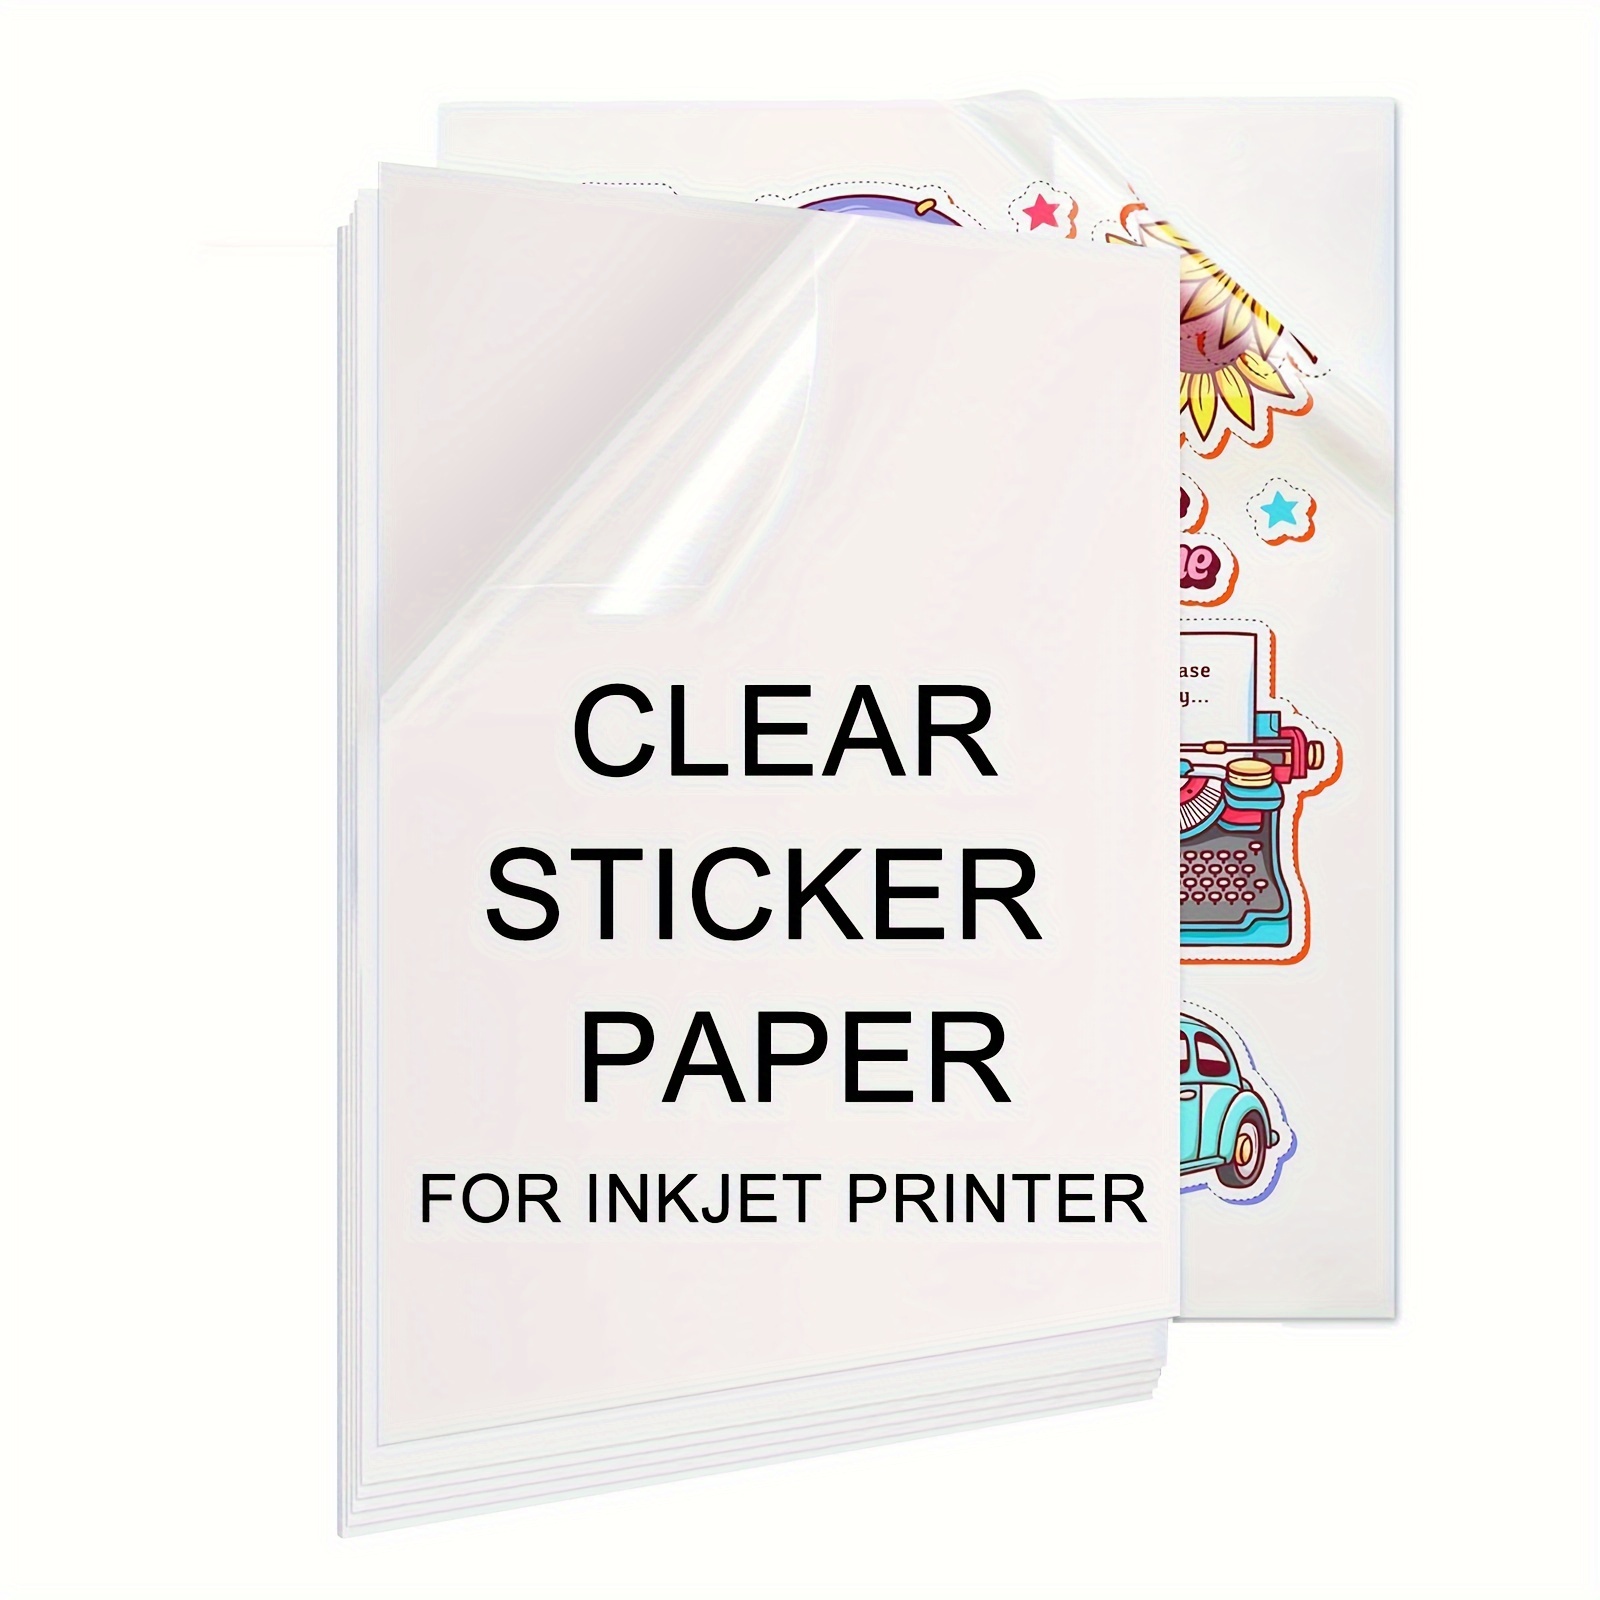 

Piece Of 10 A4 Size Clear Vinyl Sticker Papers For Inkjet Printers - Waterproof, Self-adhesive, 8.3"x11.7" Sheets With Vibrant Print Quality